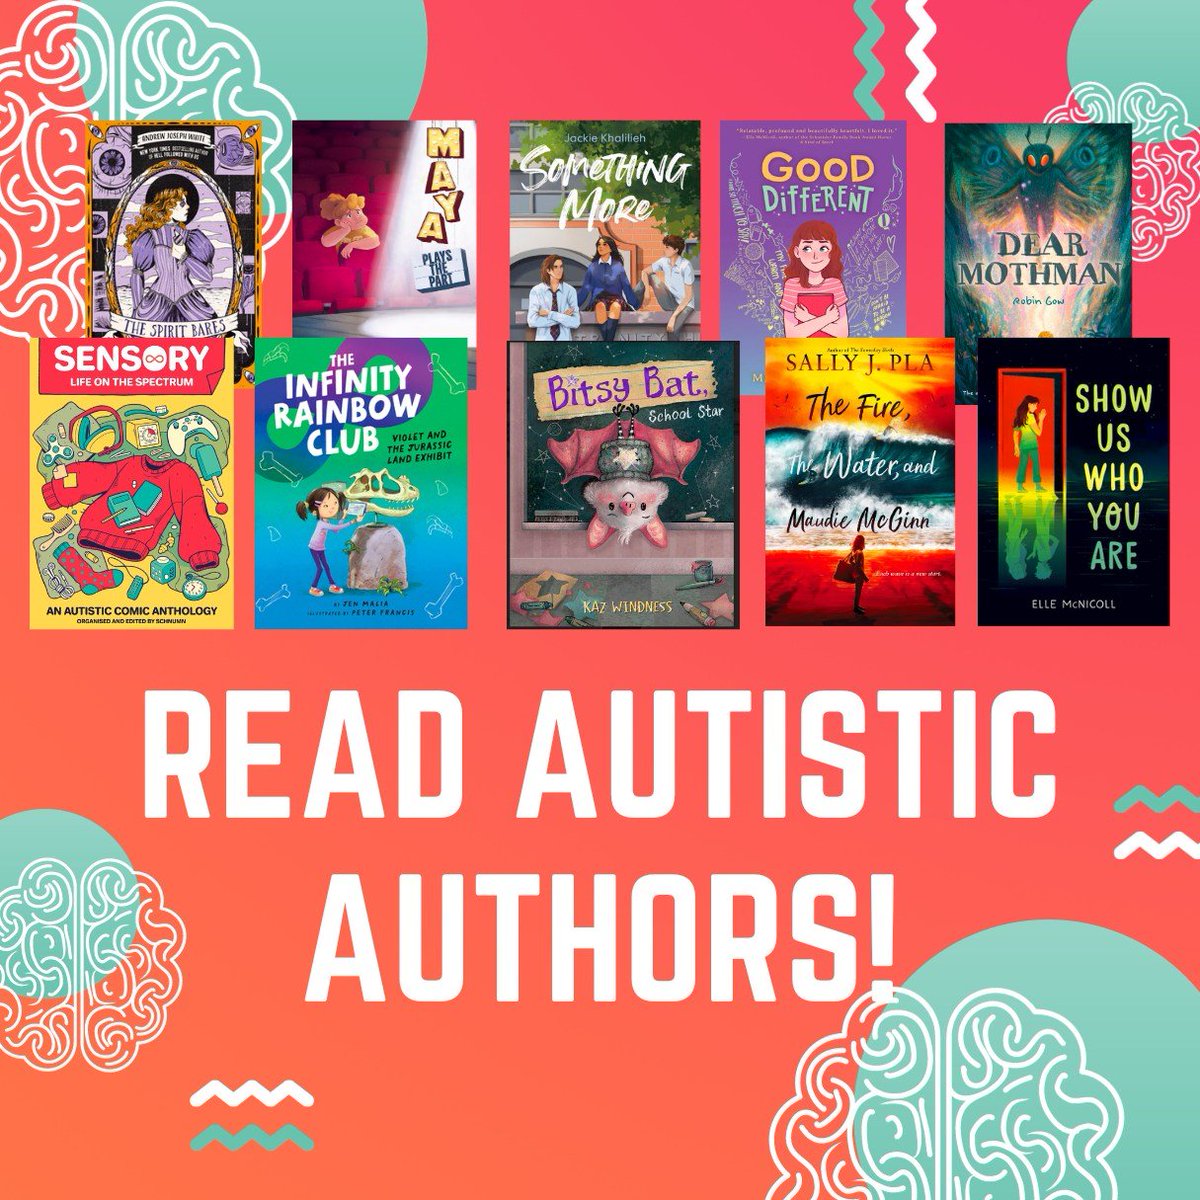 April is #AutismAcceptanceMonth! It's also the 1 year anniversary of GOOD DIFFERENT coming out! Celebrate by reading Autistic Authors! Here are just a few titles written by autistic authors that I particularly enjoyed. What are your favorite books written by autistic authors?